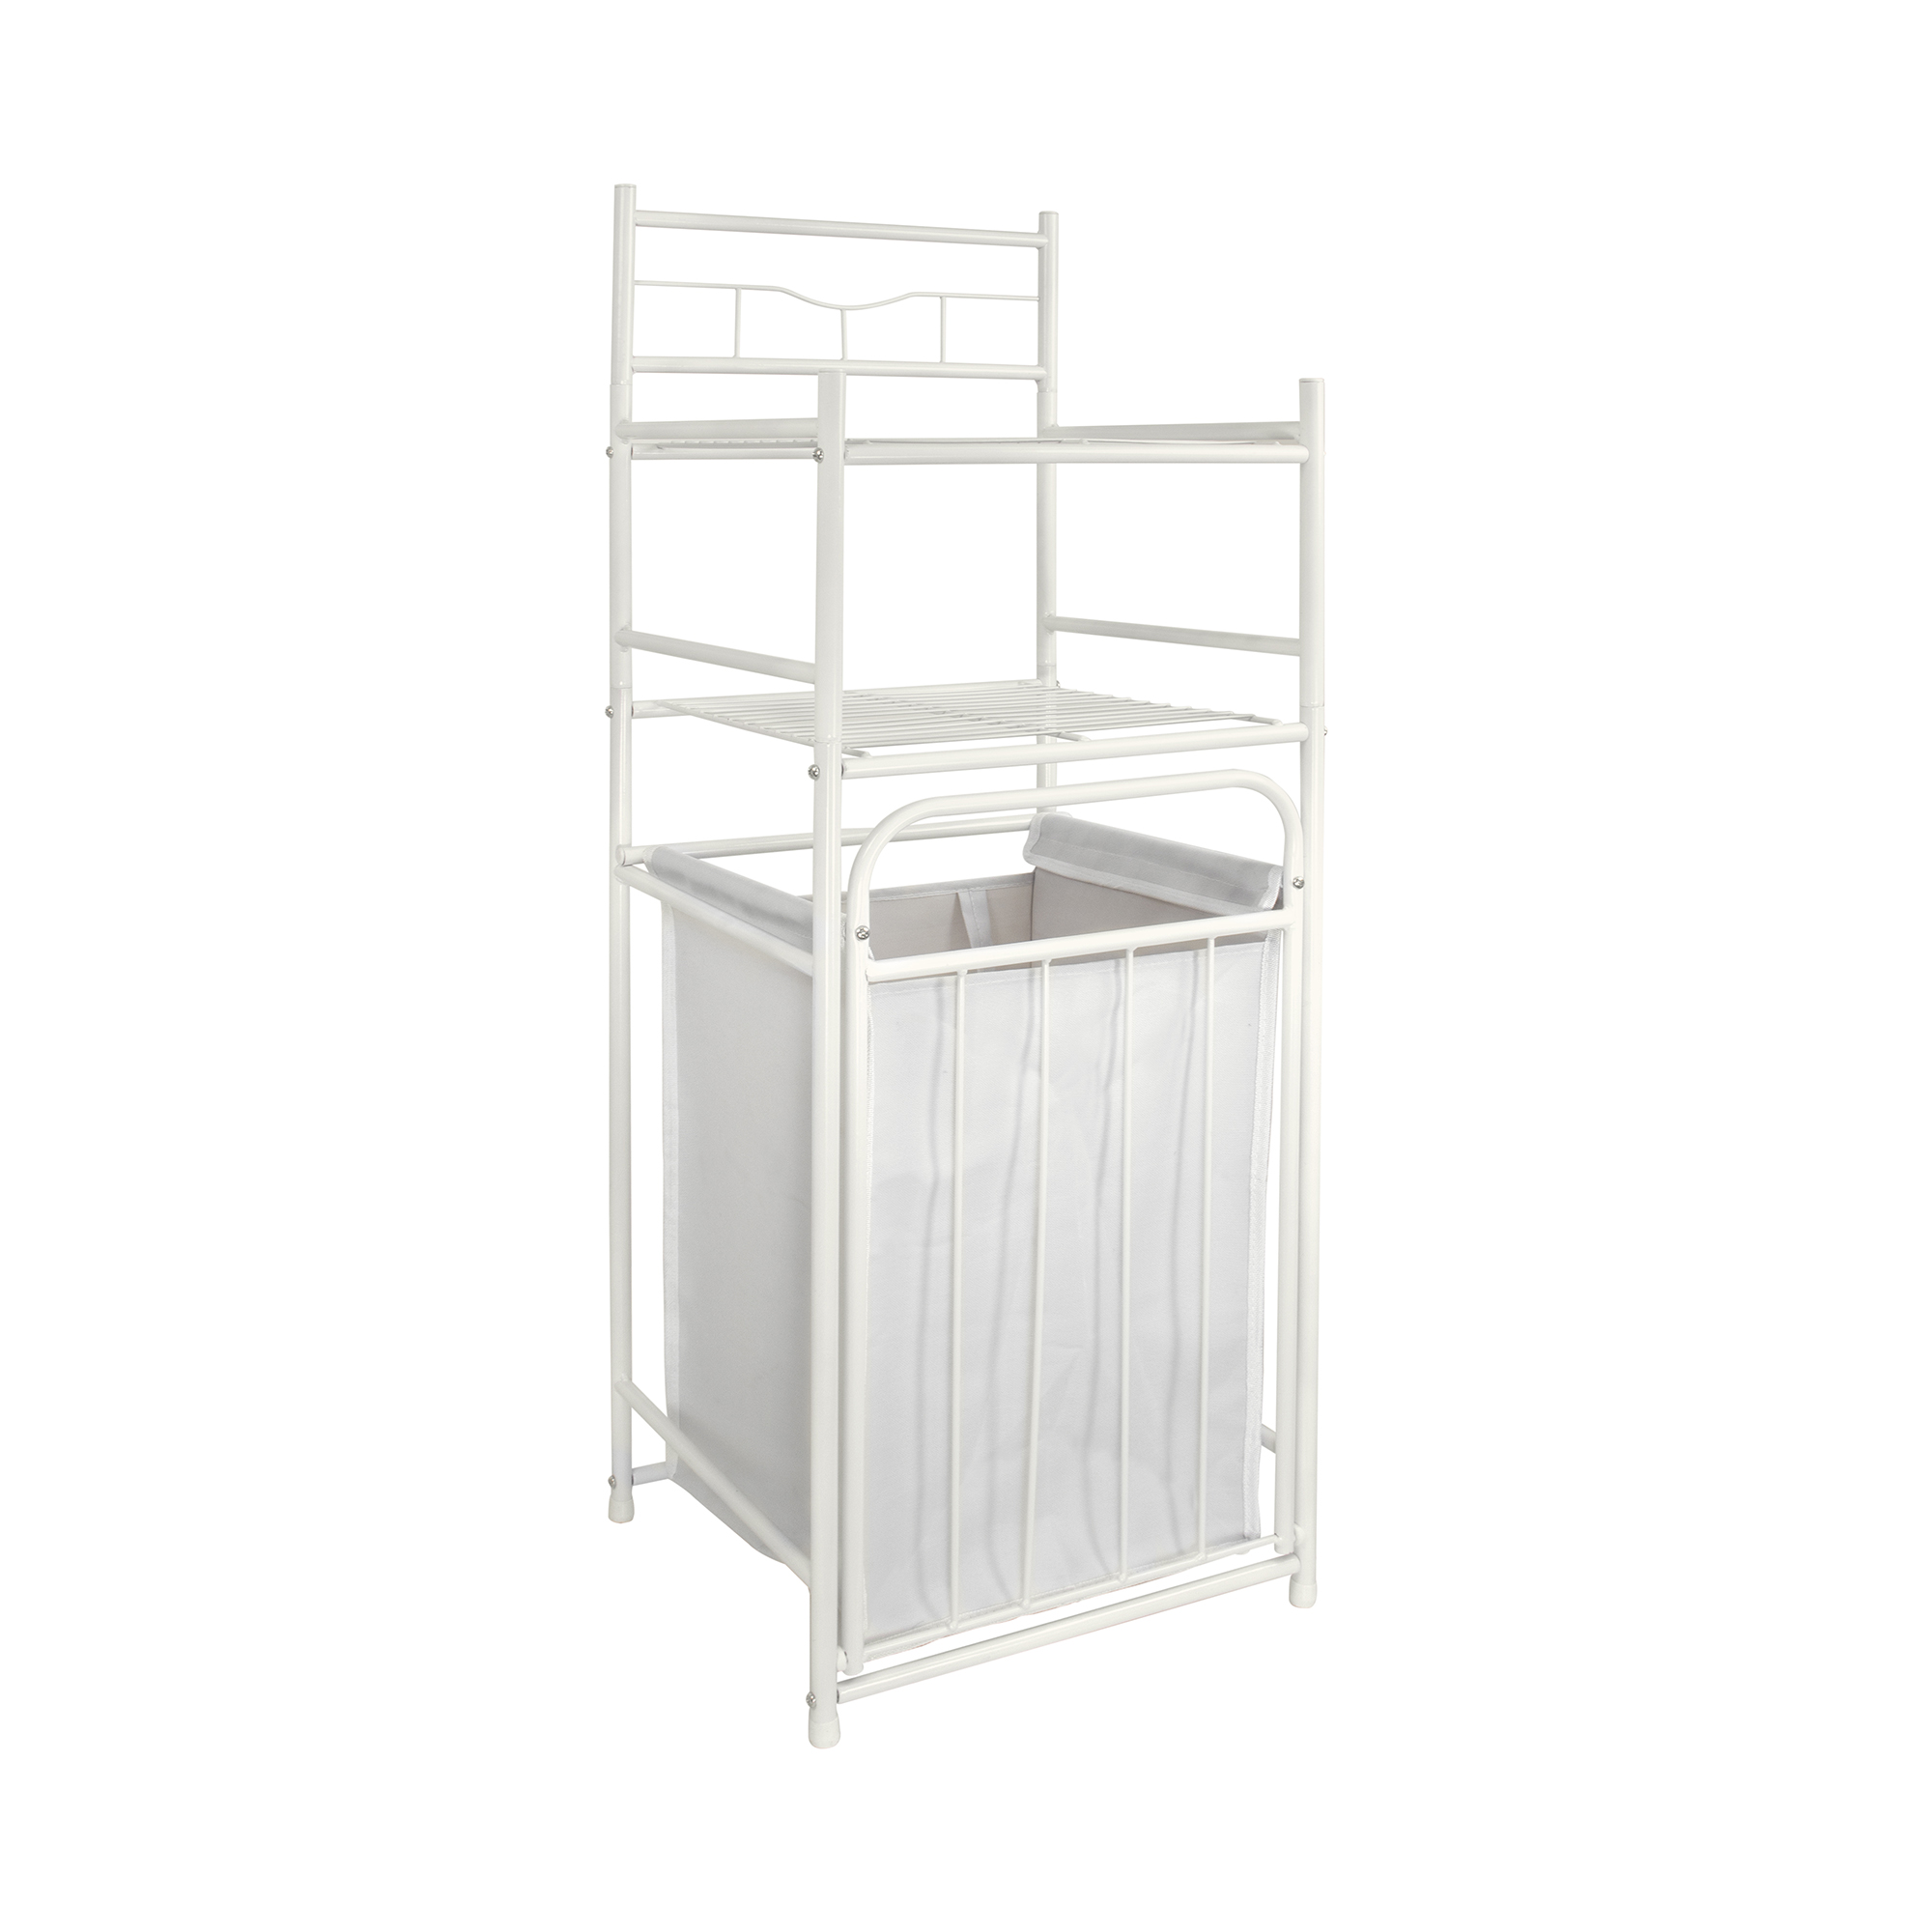 2-Tier Metal Storage Shelves with Laundry Hampers